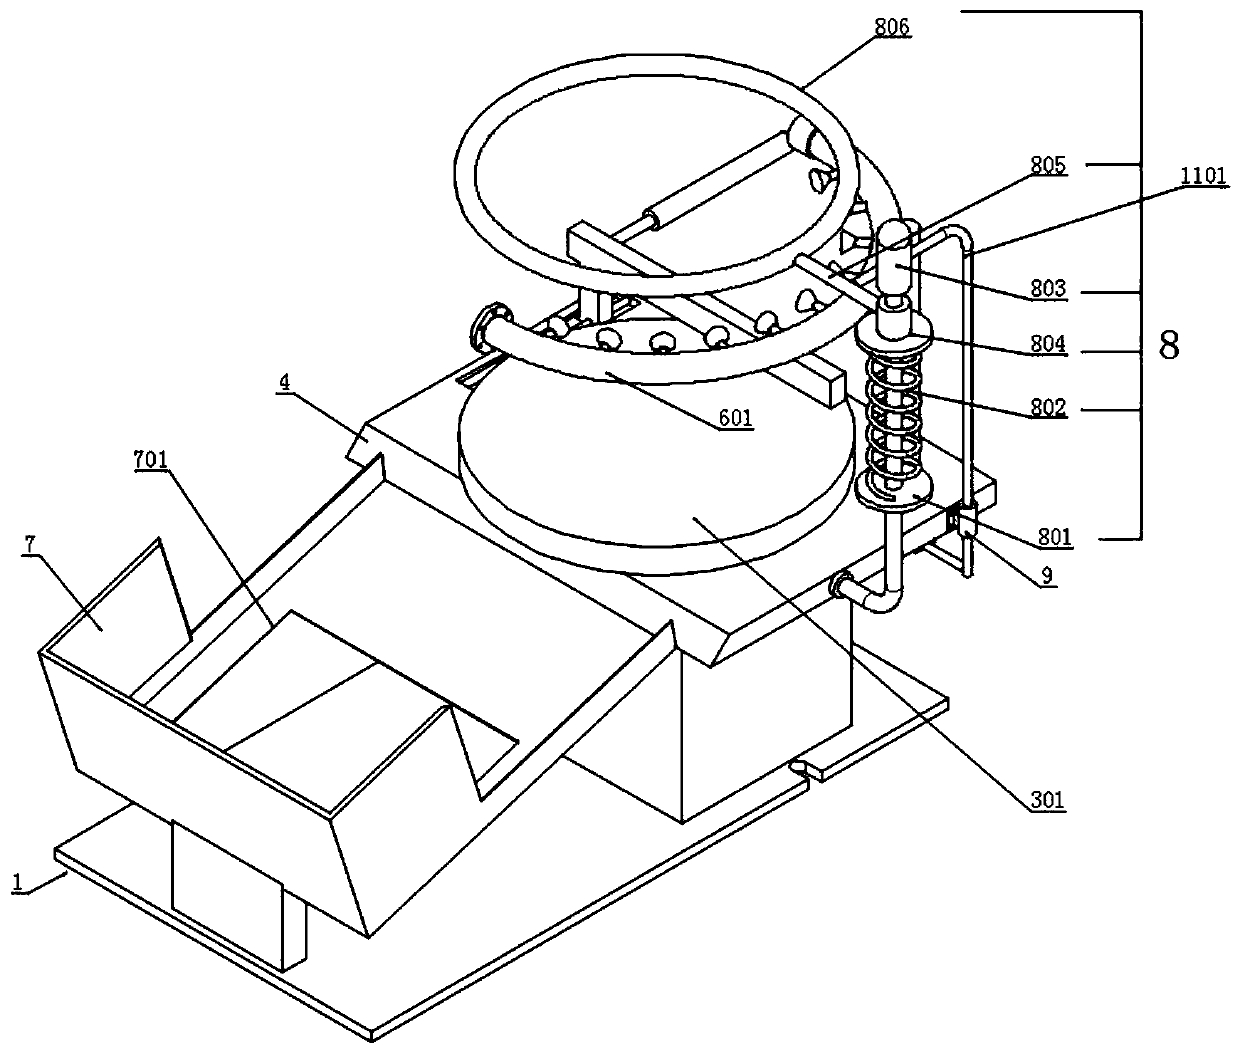 Mechanical-based heat treatment device for flanged steel pot products